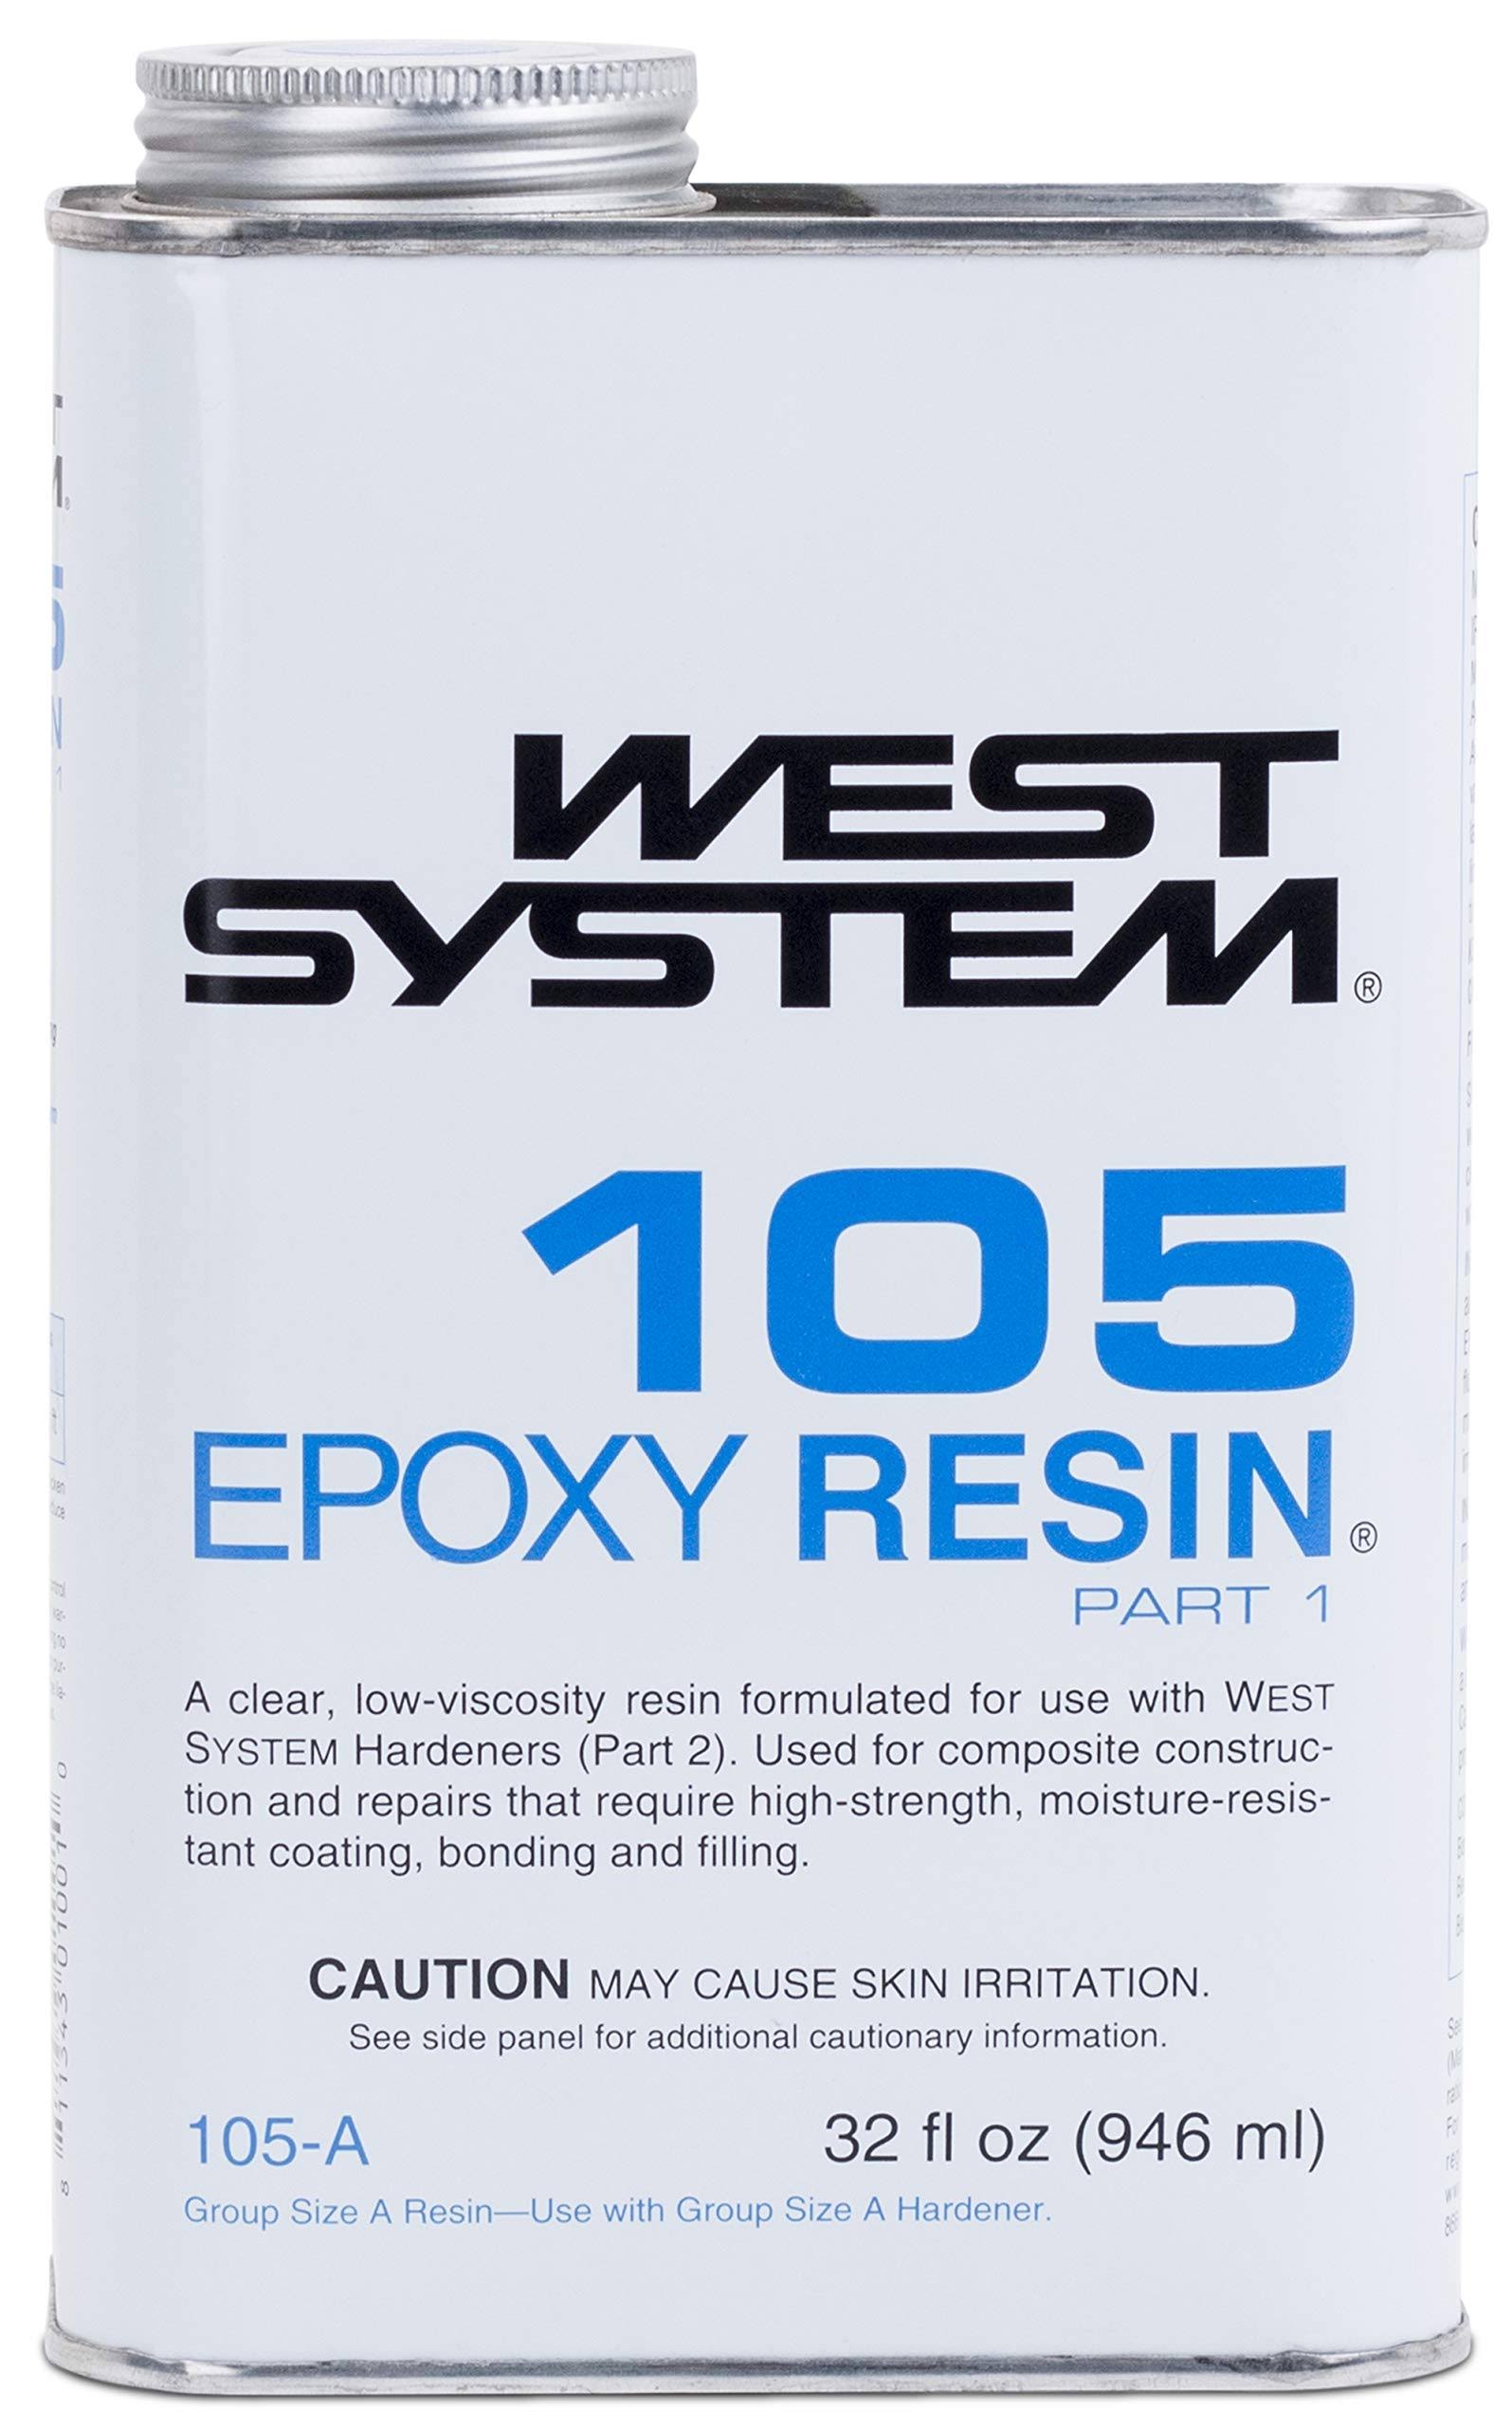 West System Epoxy Resin - 1qt, Clear